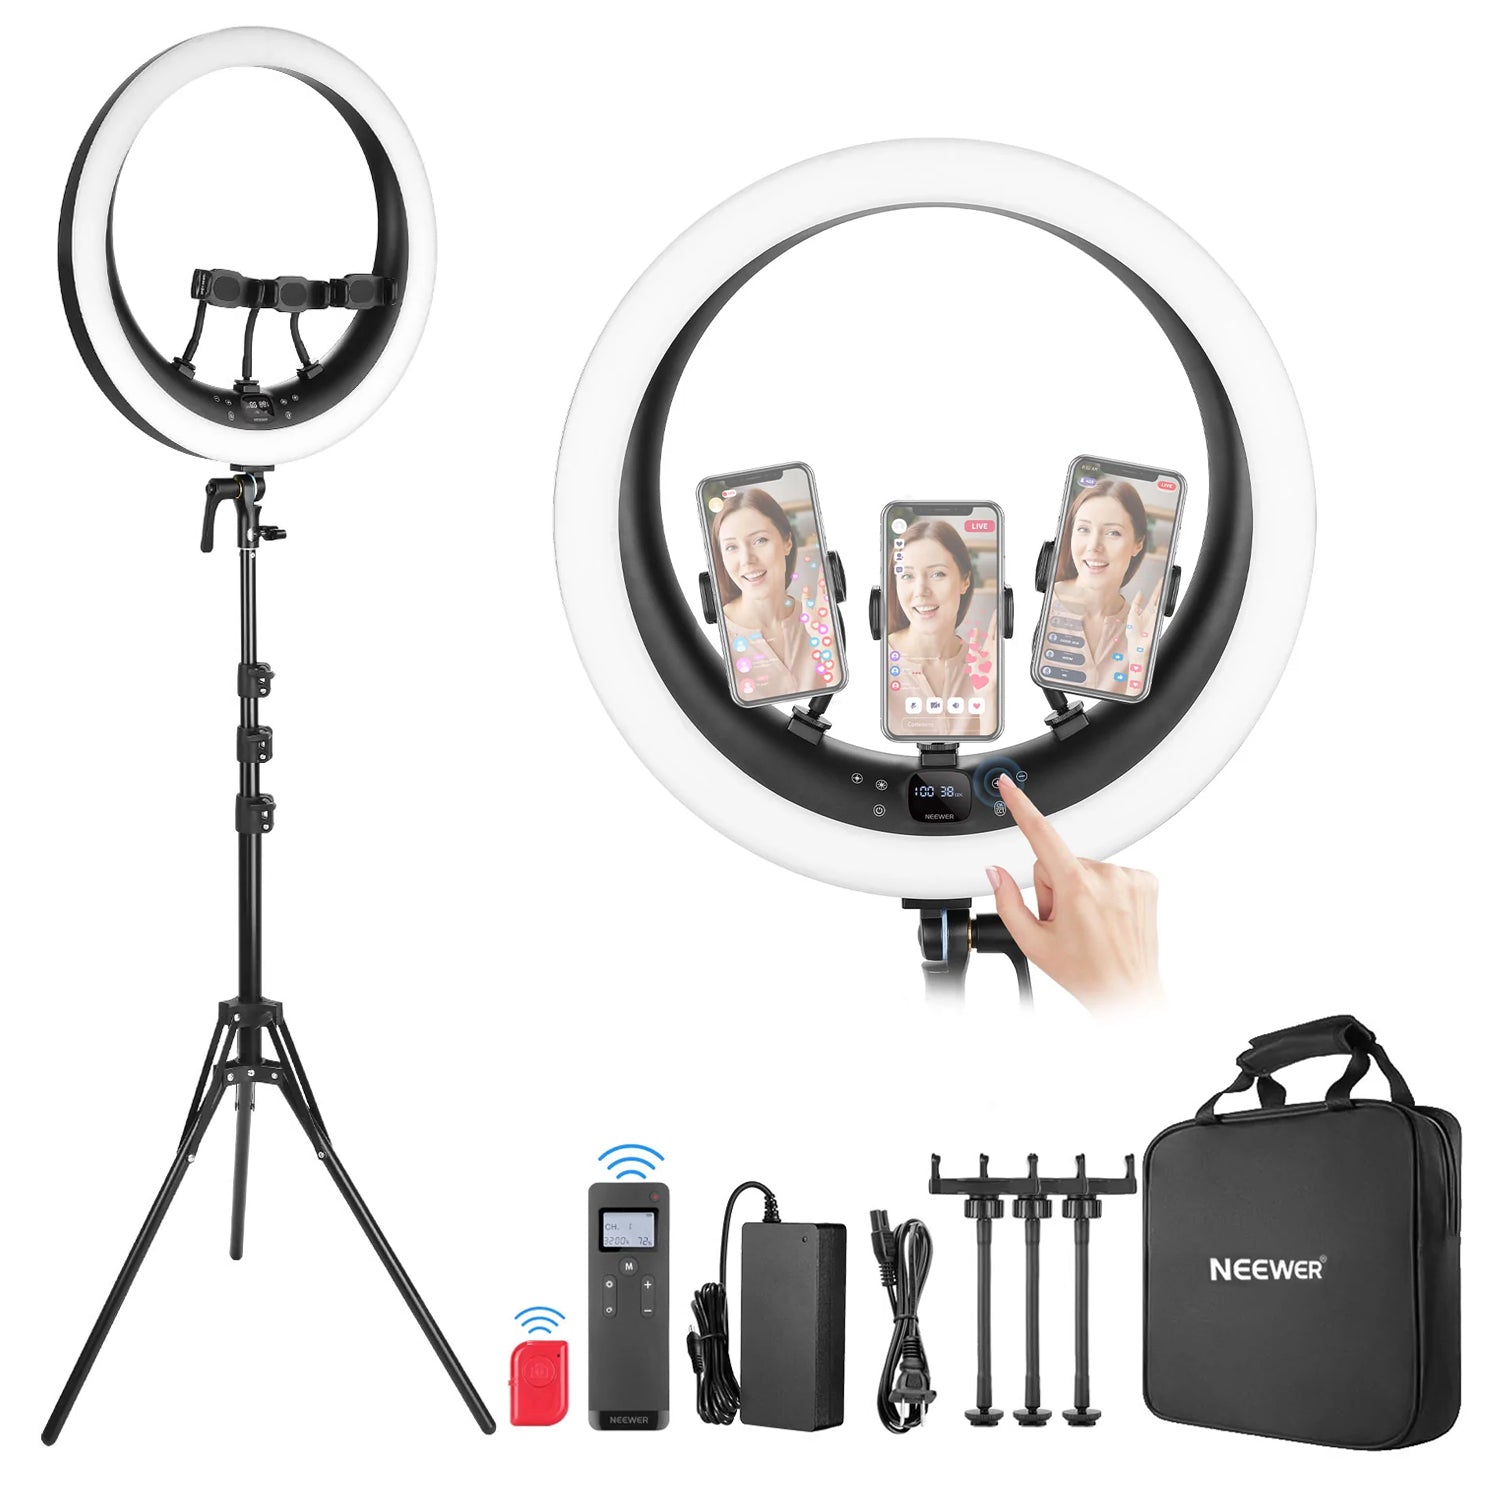 NEEWER SRP18-2.4G Remote 18-inch LED Ring Light